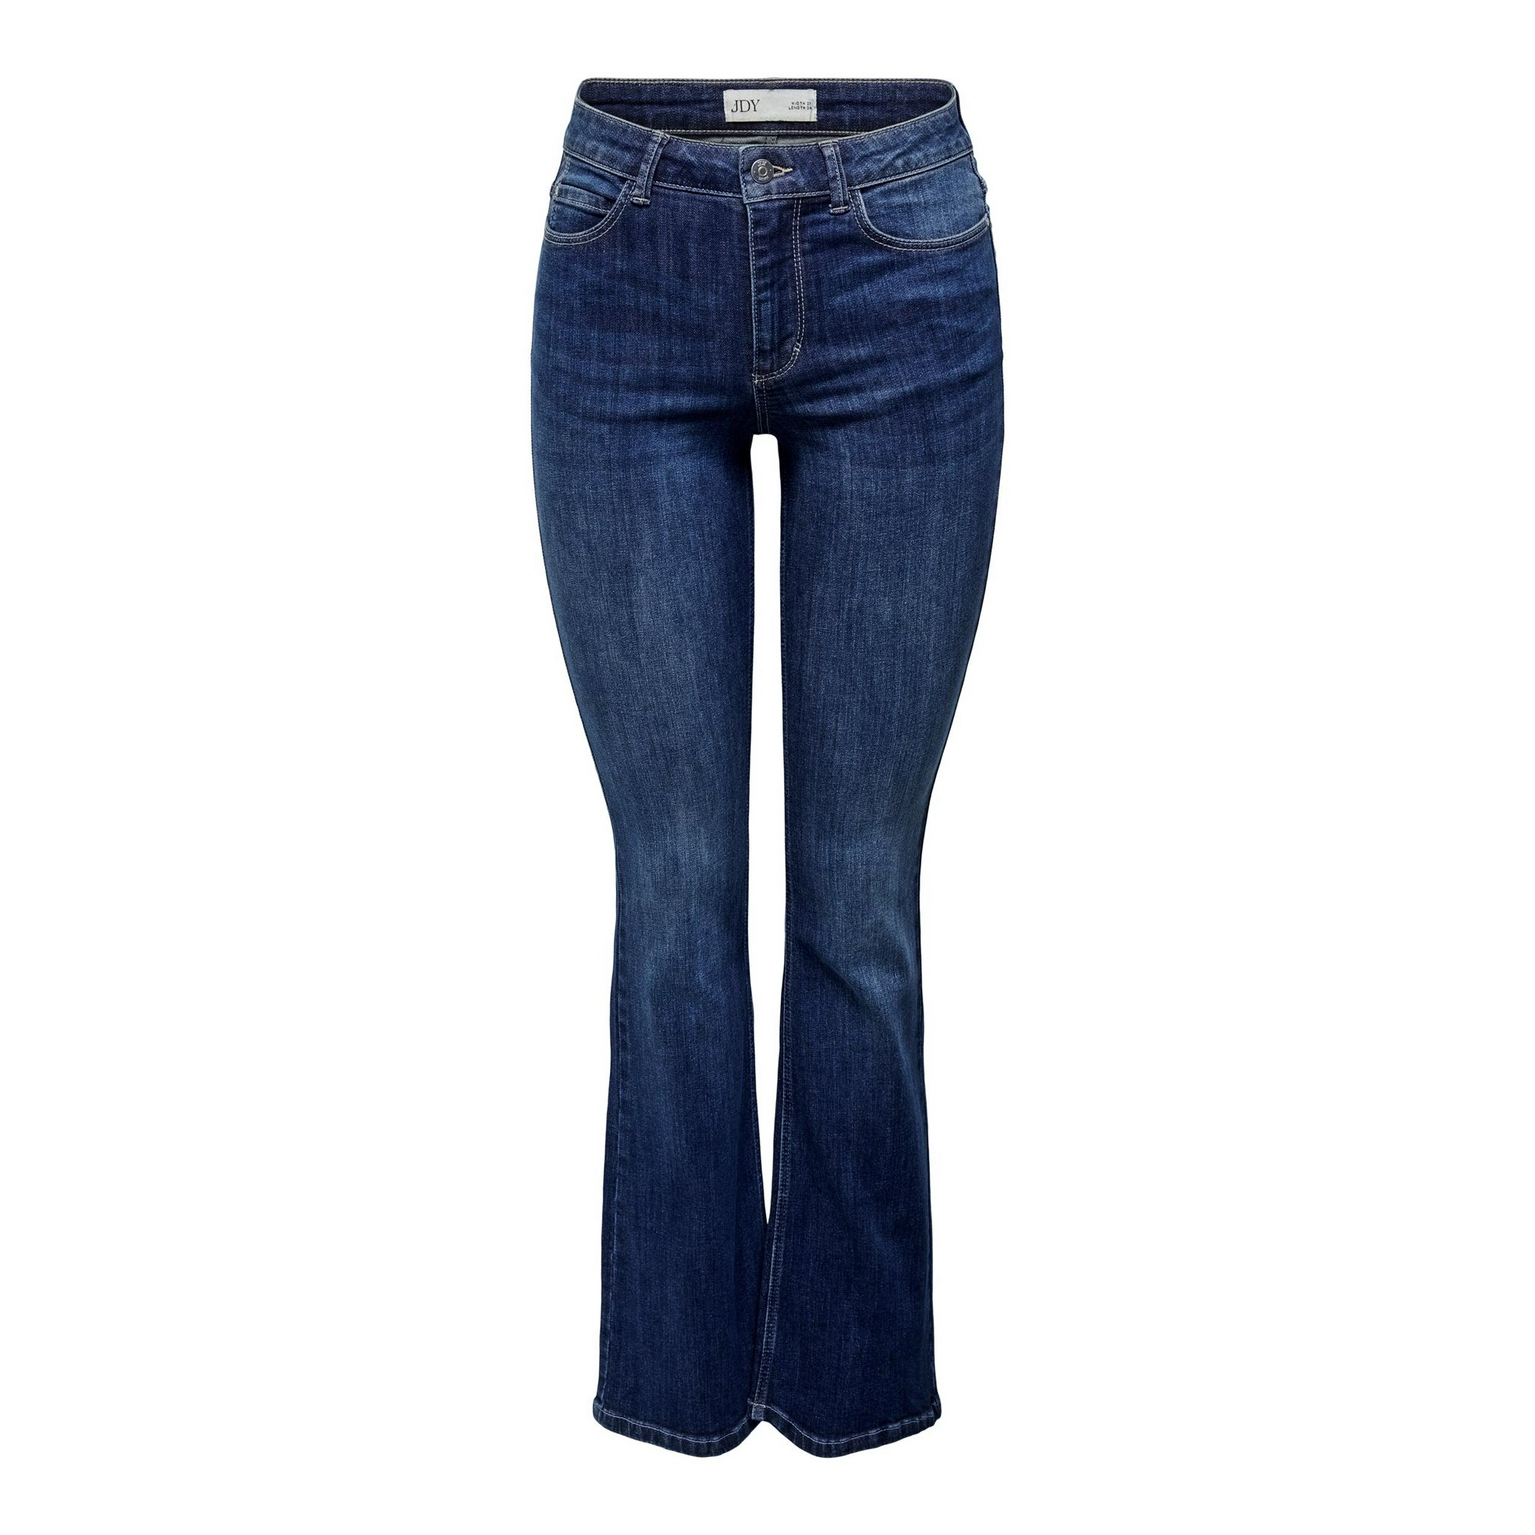 Jeans jackie flared - Fifty8